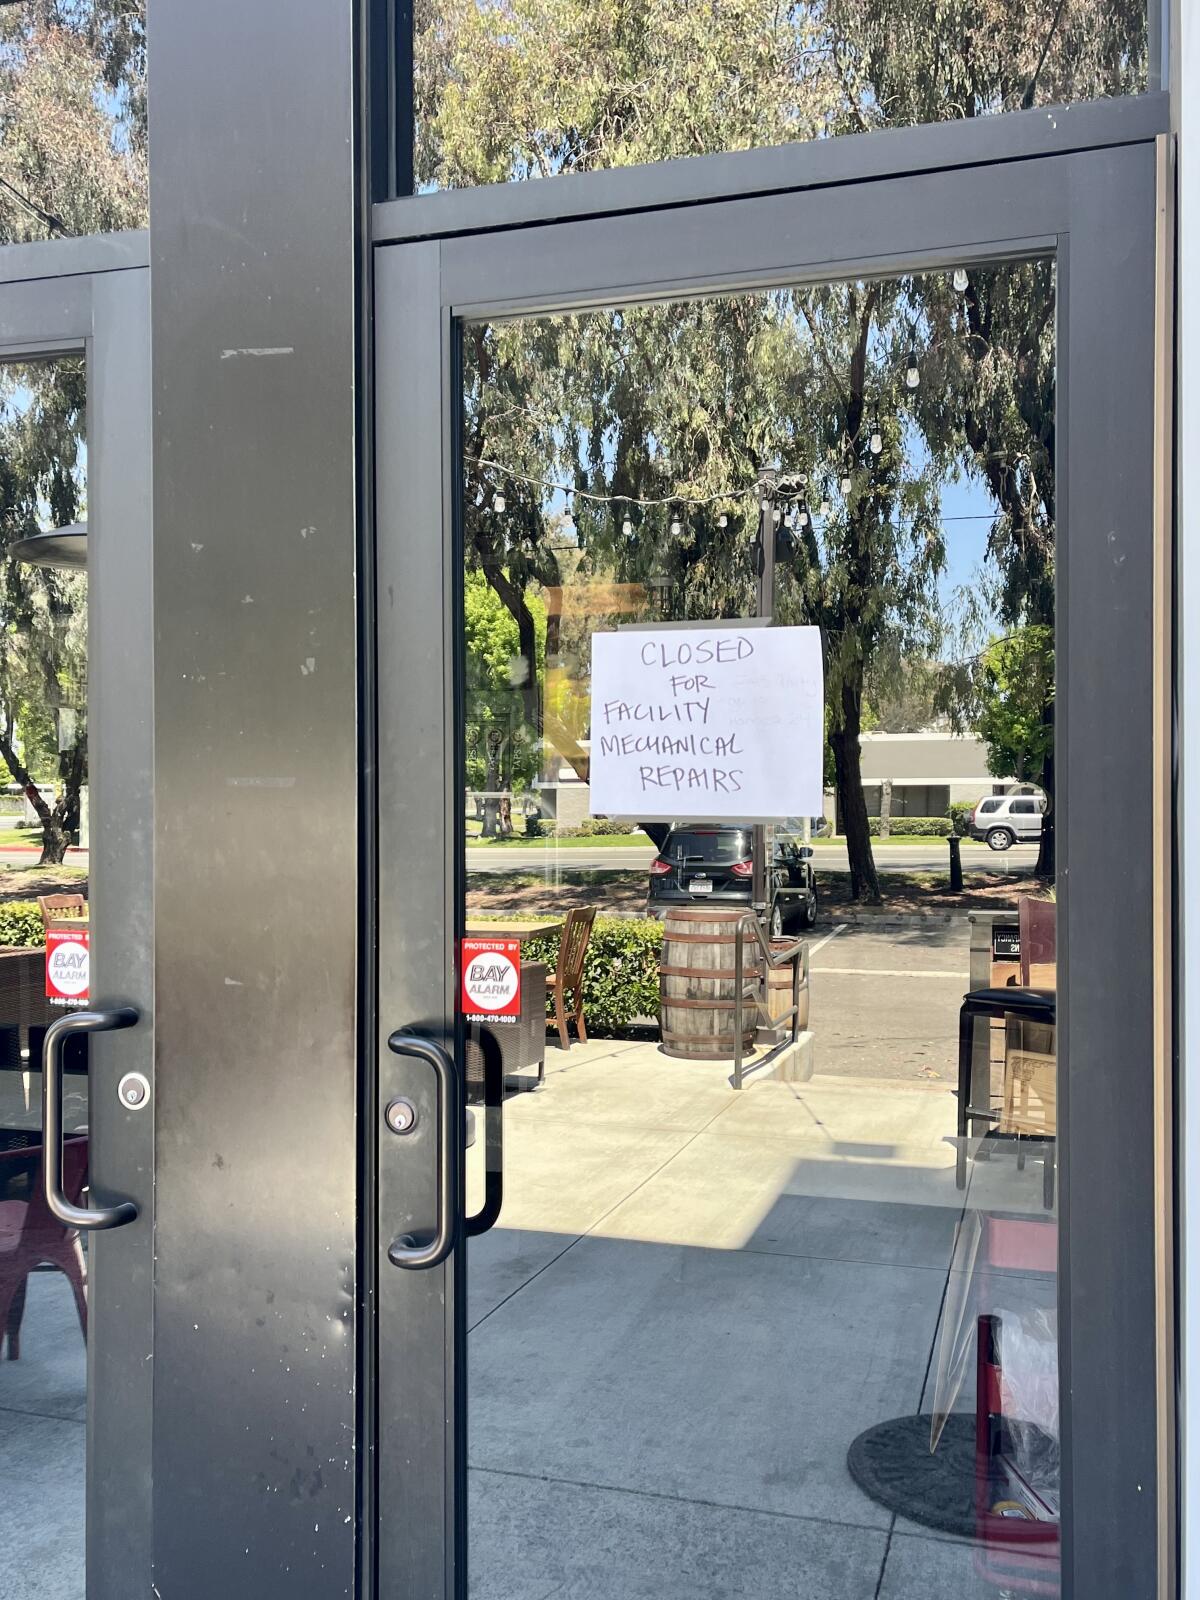 A "closed" sign on the door at TAPS Brewery & Barrel Room in Tustin cites "facility mechanical repairs."